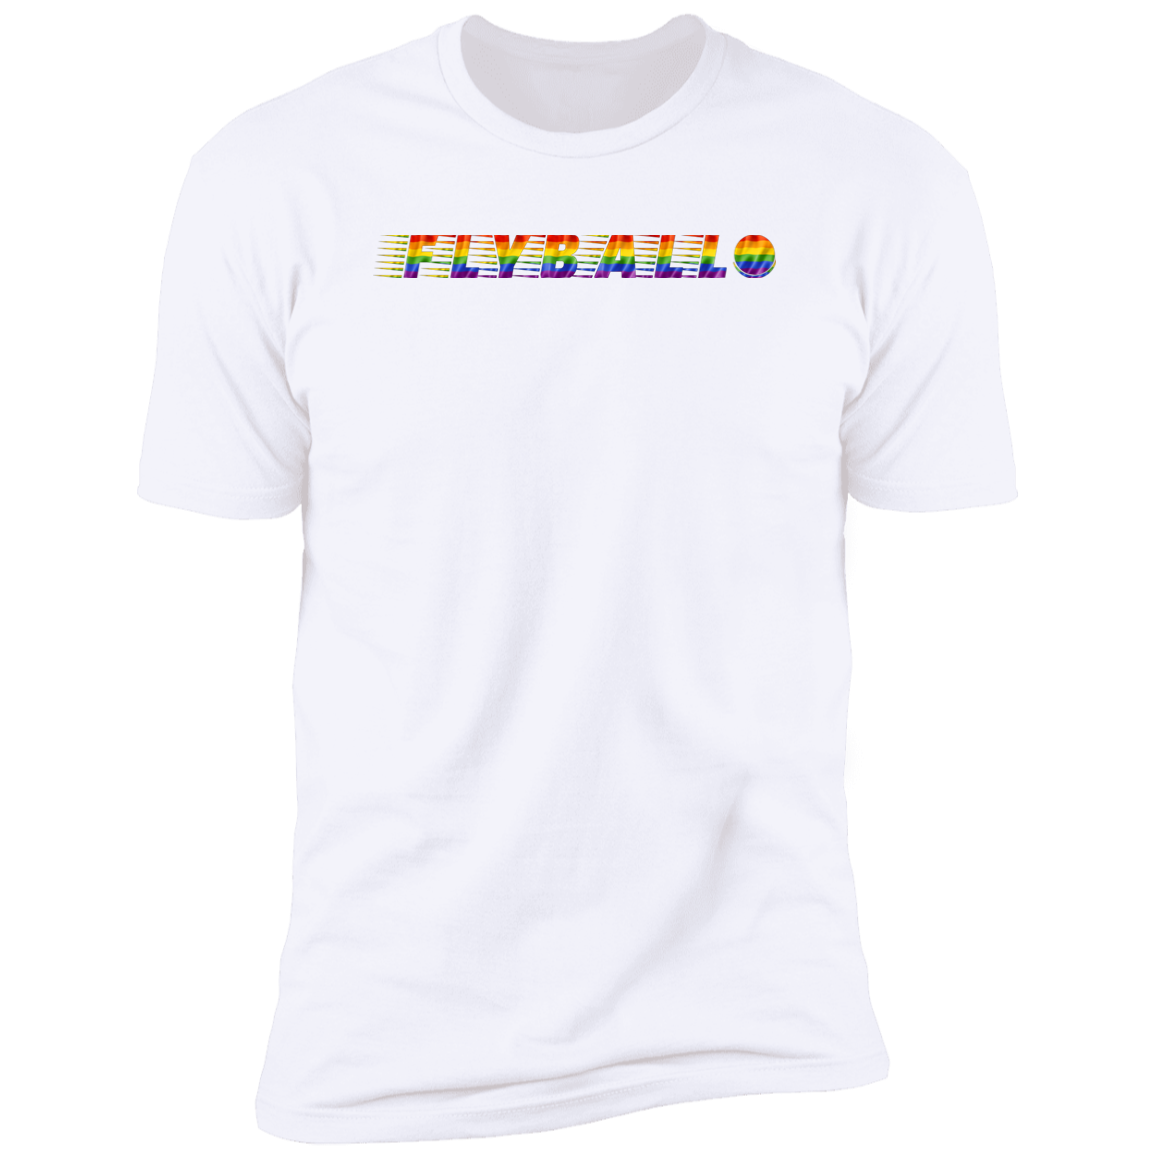 Flyball pride t-shirt, dog pride dog flyball shirt for humans, in white